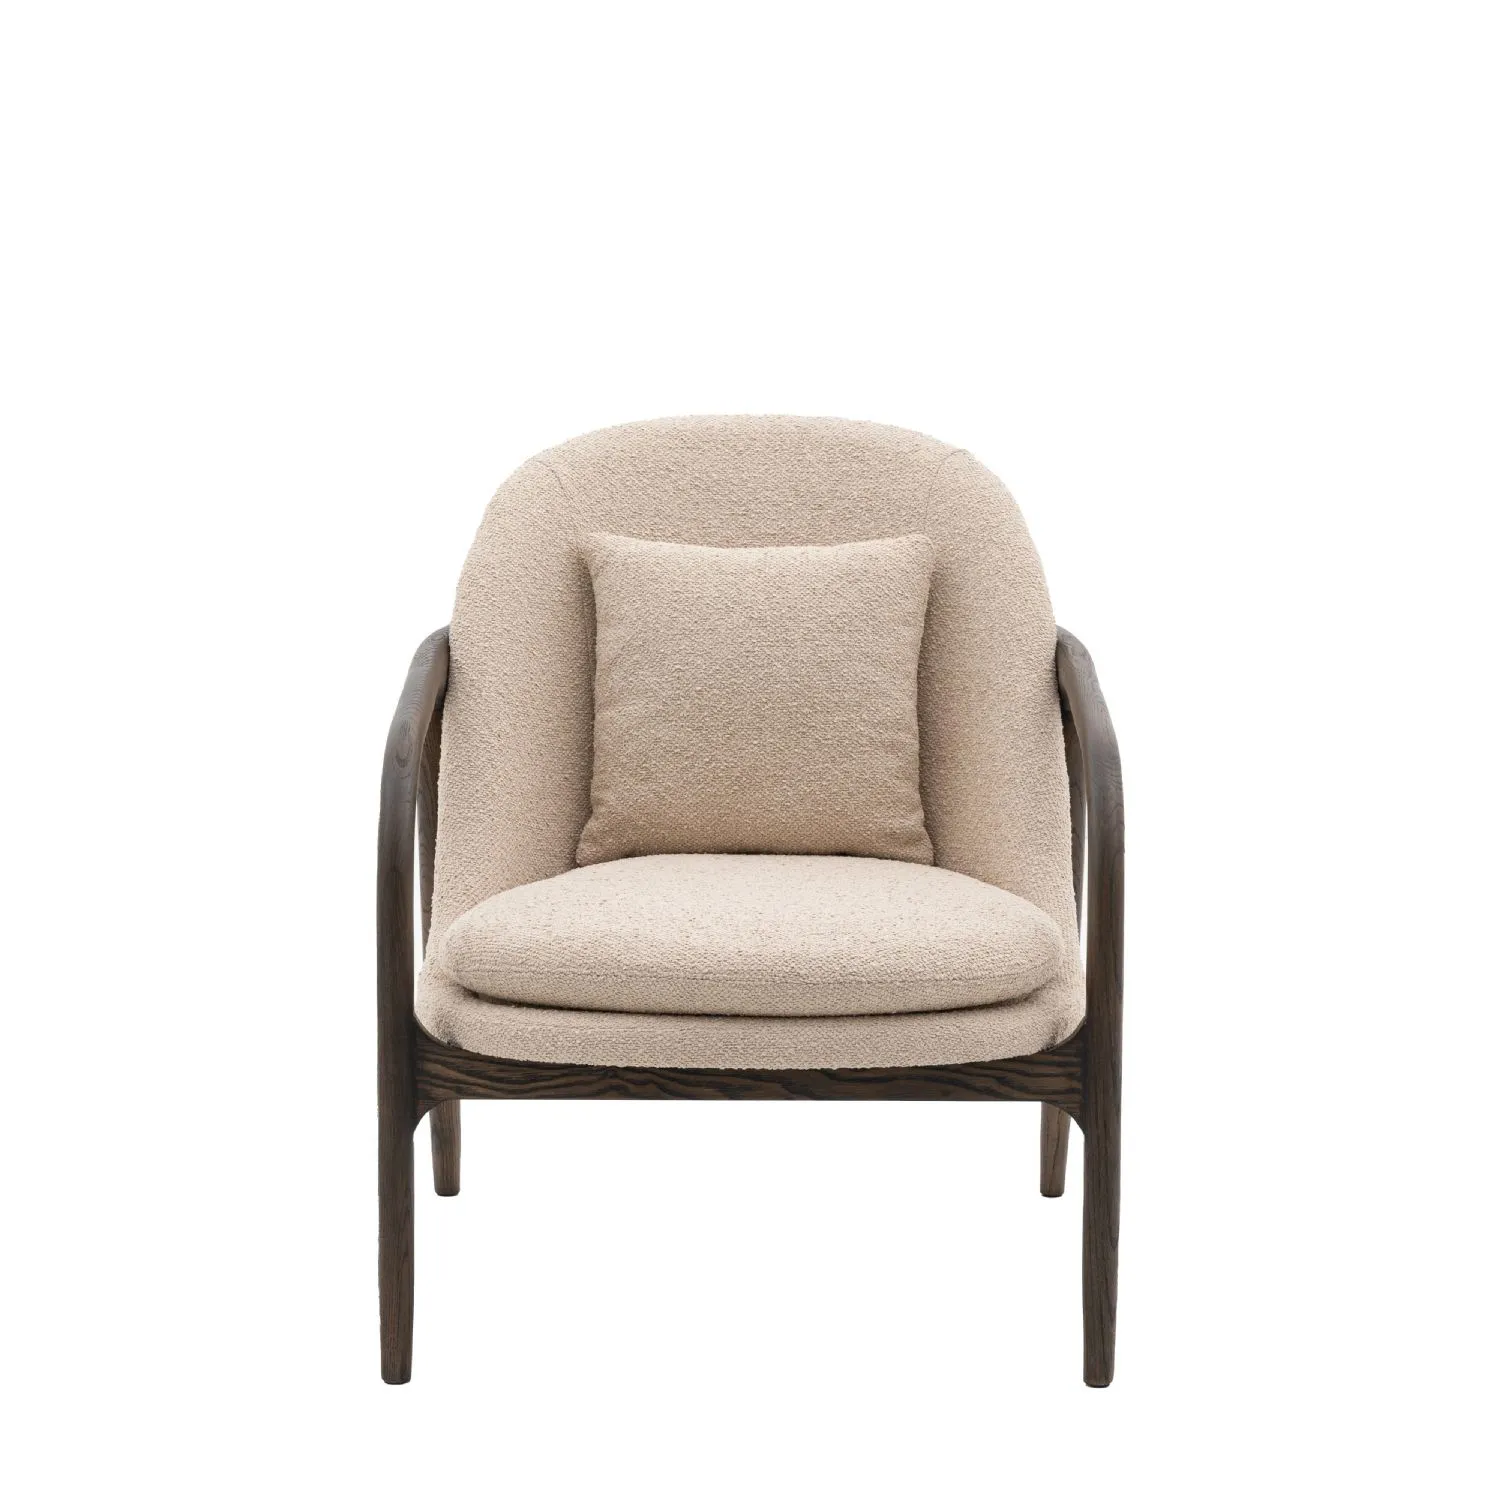 Taupe Cream Fabric Cushioned Armchair with Dark Wood Frame